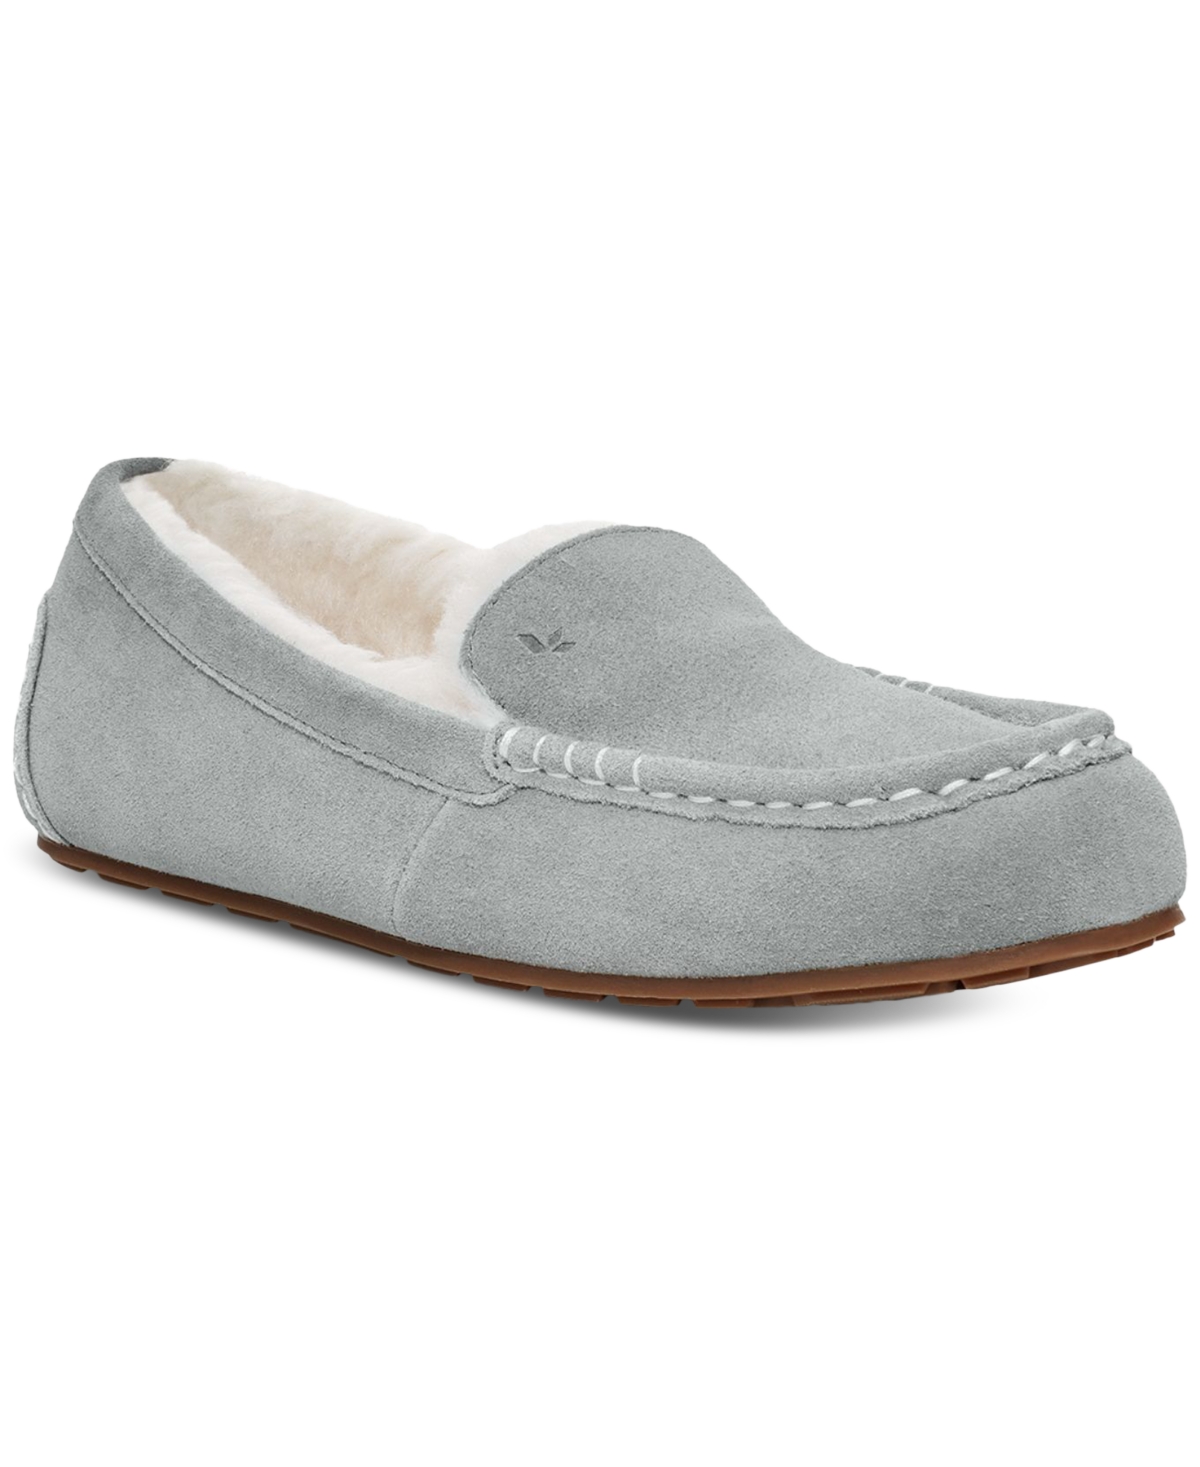 Women's Lezly Slippers - Red Sand